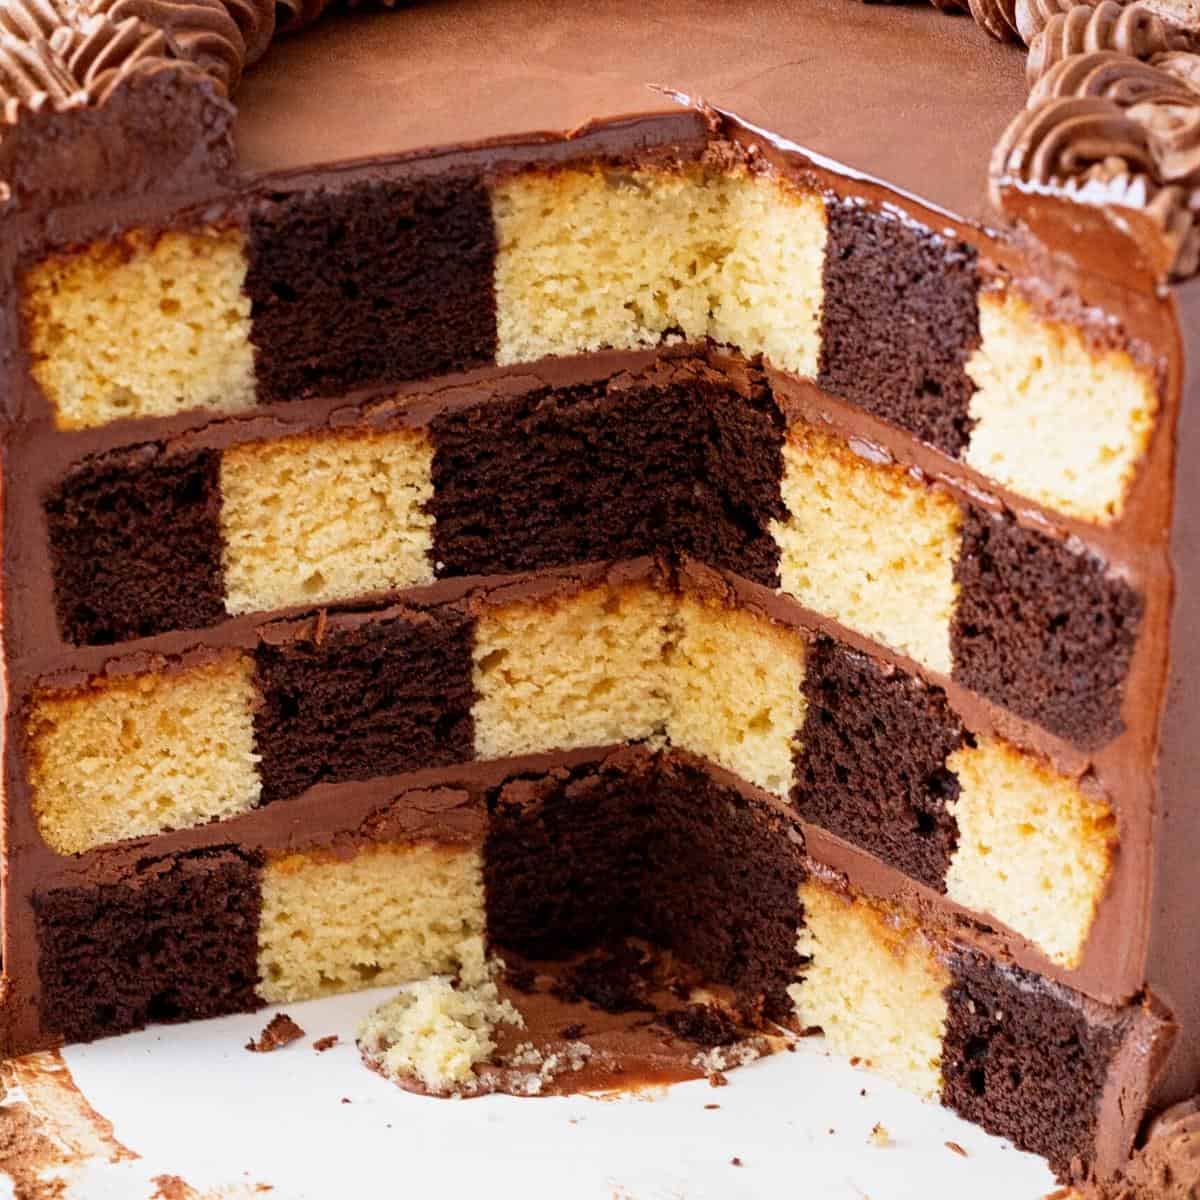 A checkerboard cake on the table.